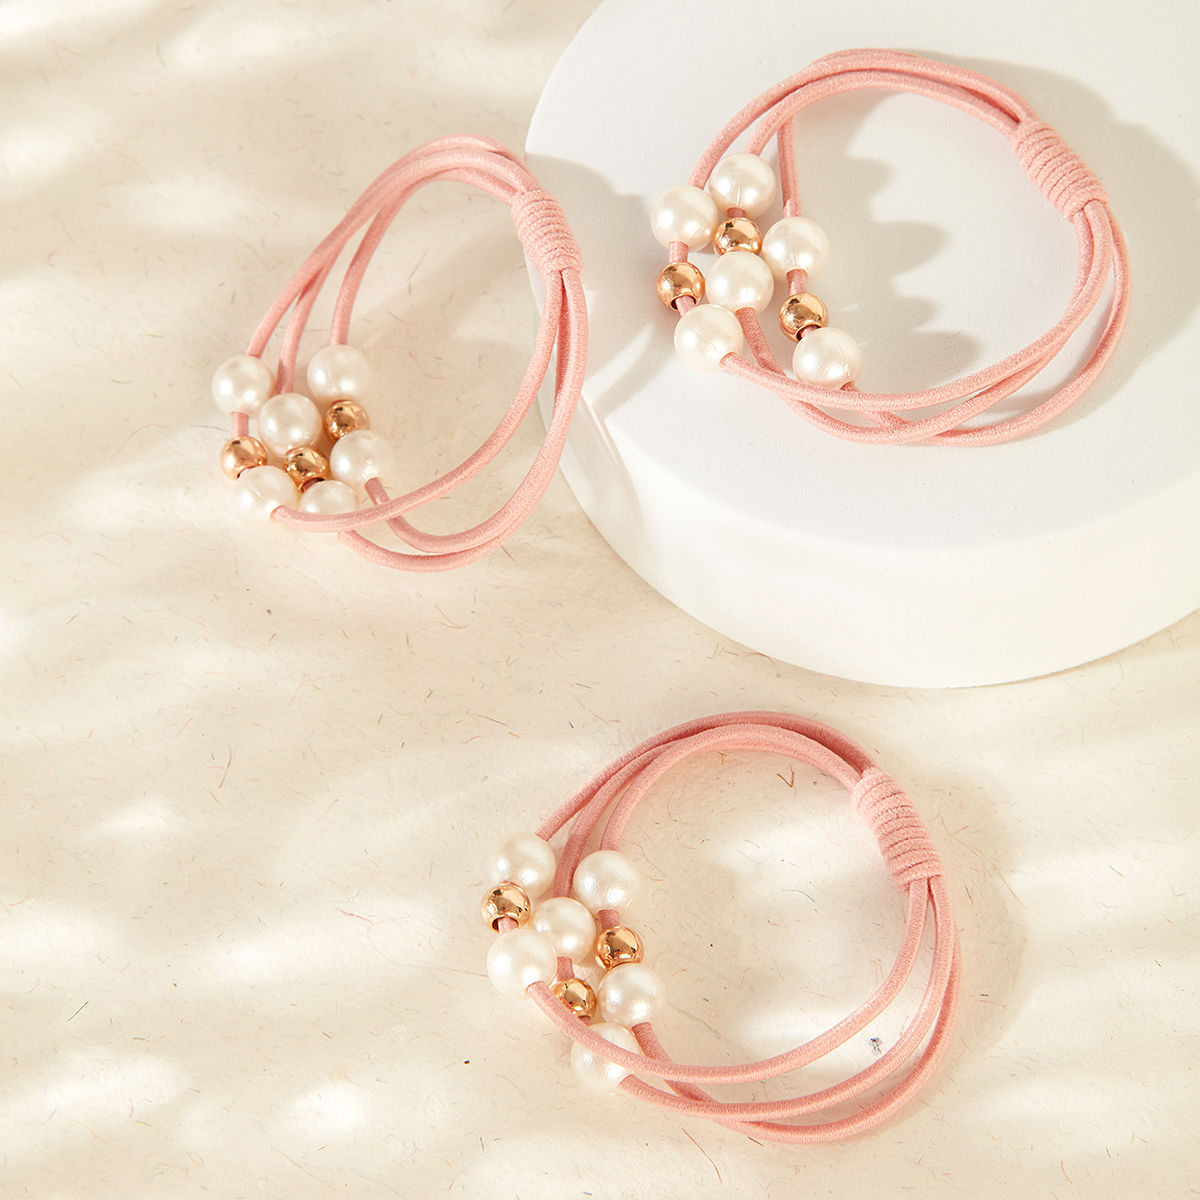 SET OF 3 CONTEMPORARY PEARLS STUDDED PINK HAIR TIES